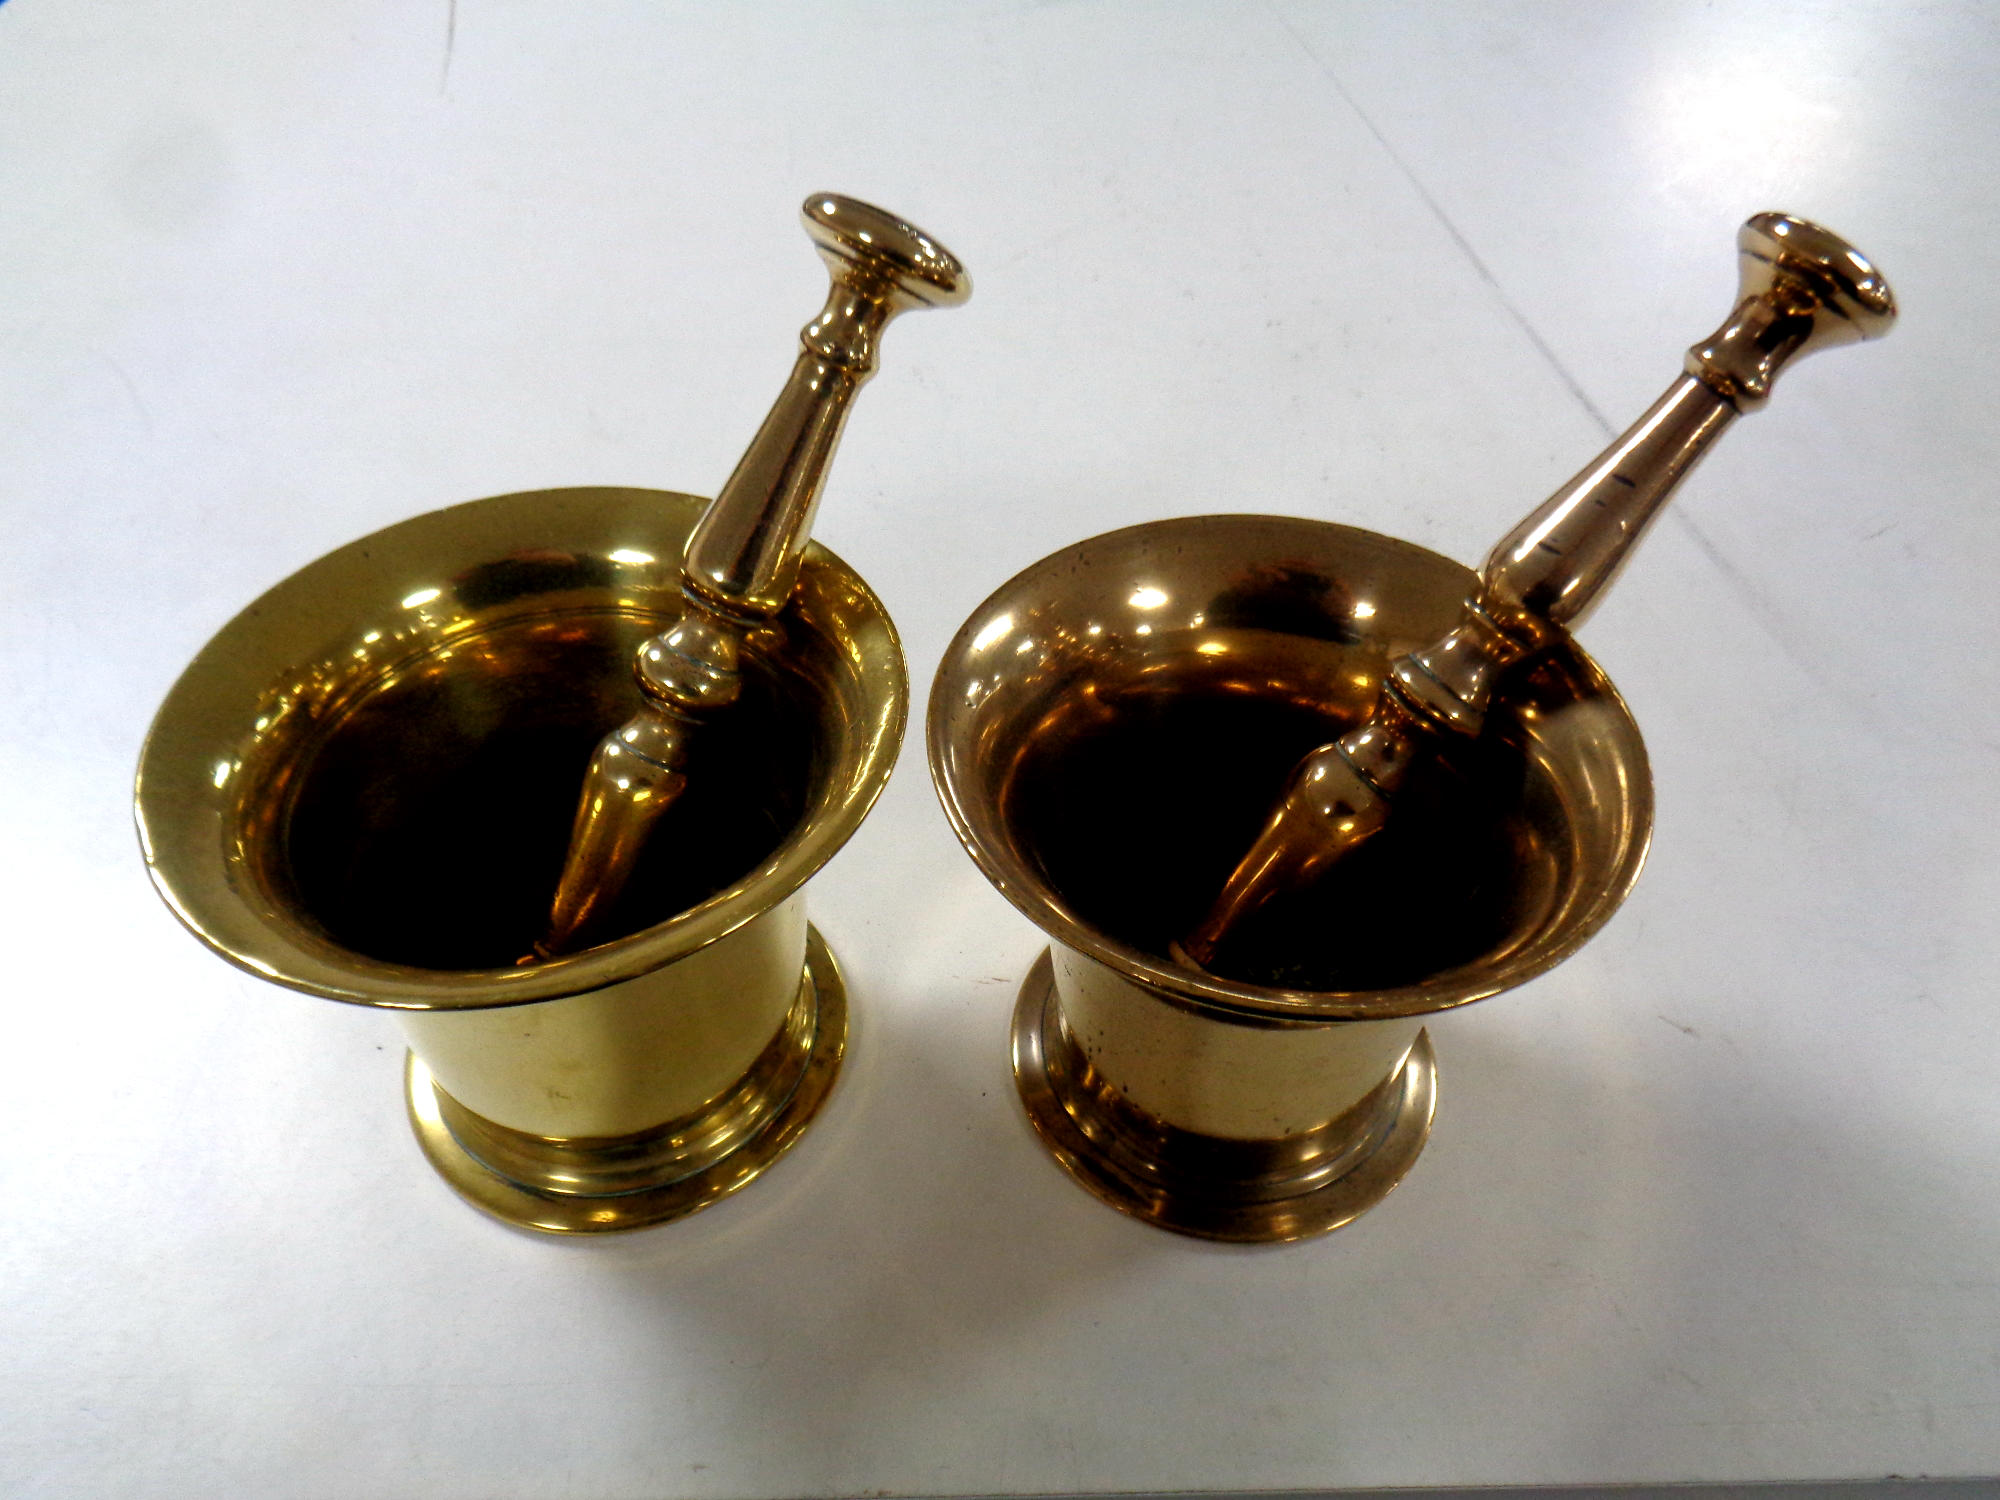 Two antique brass pestles and mortars.